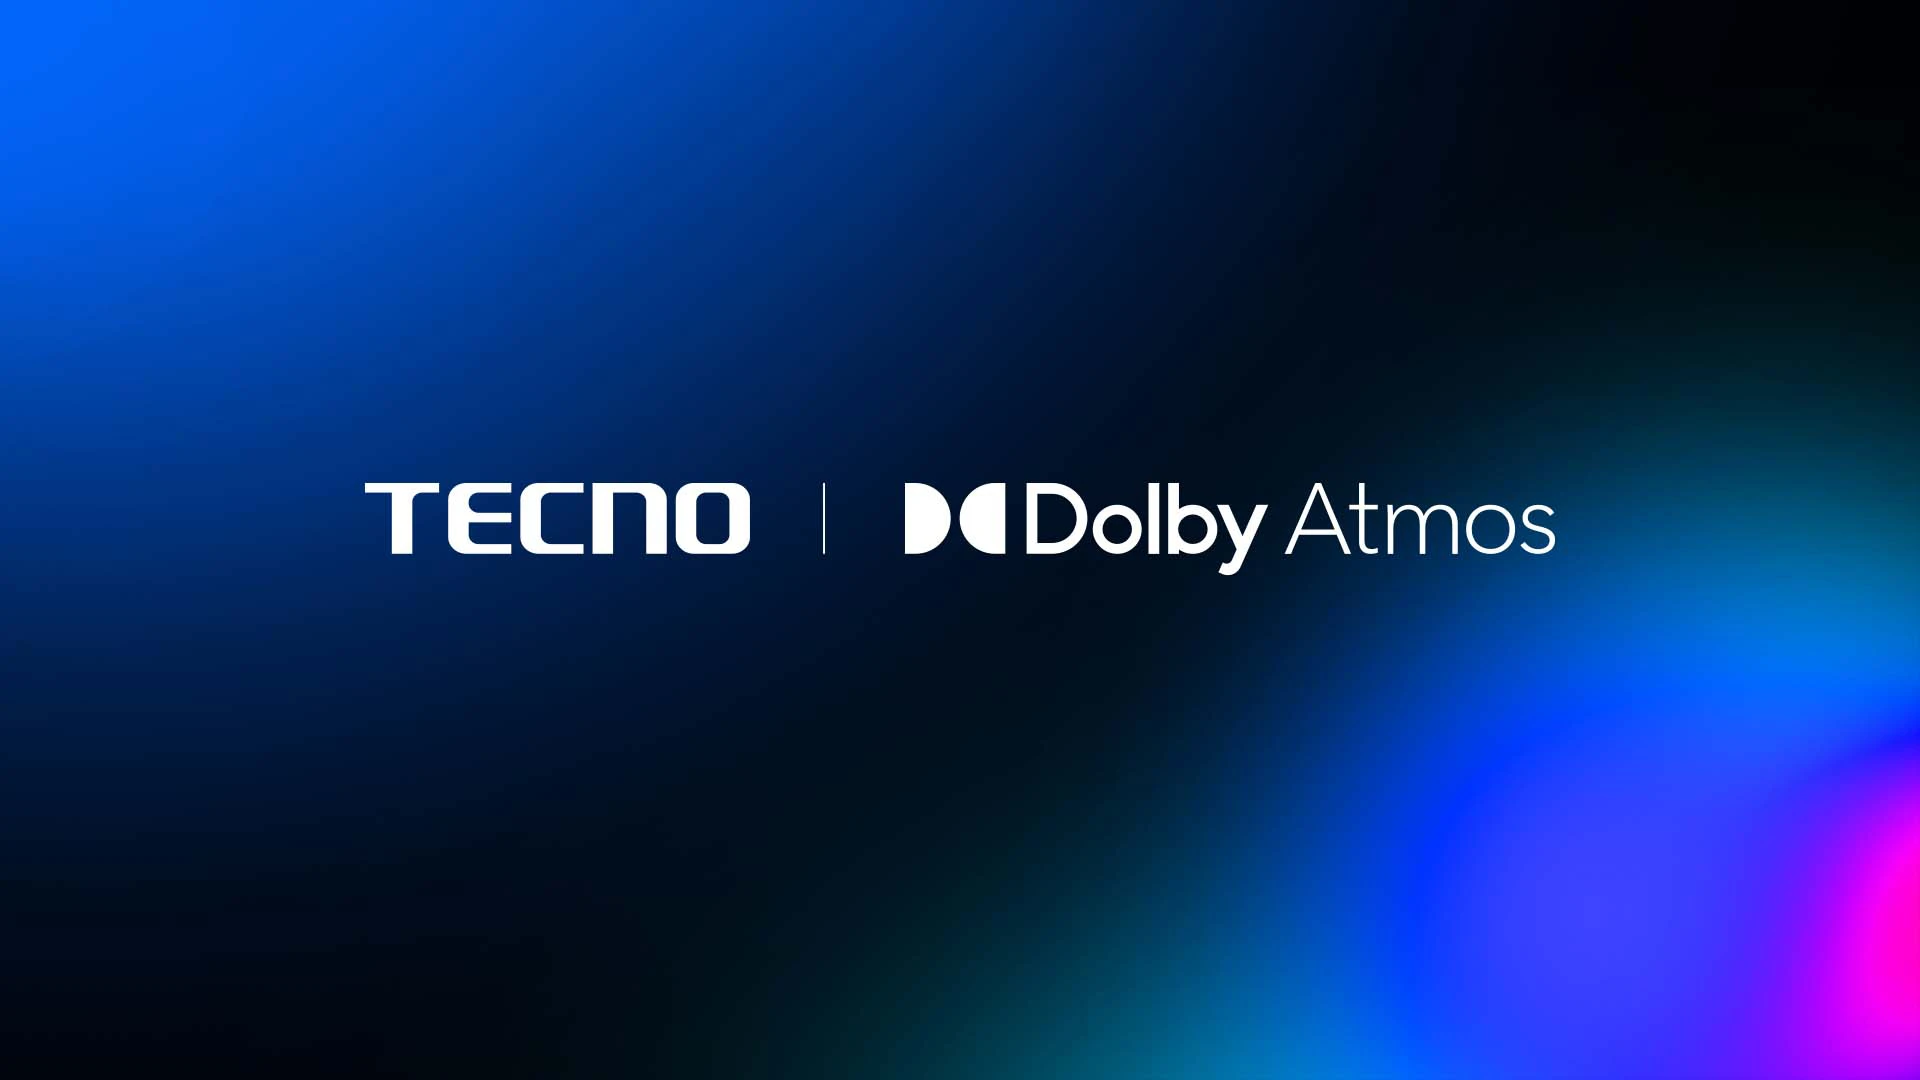 Tecno and Dolby join forces to deliver a revolutionary surround sound experience to global consumers